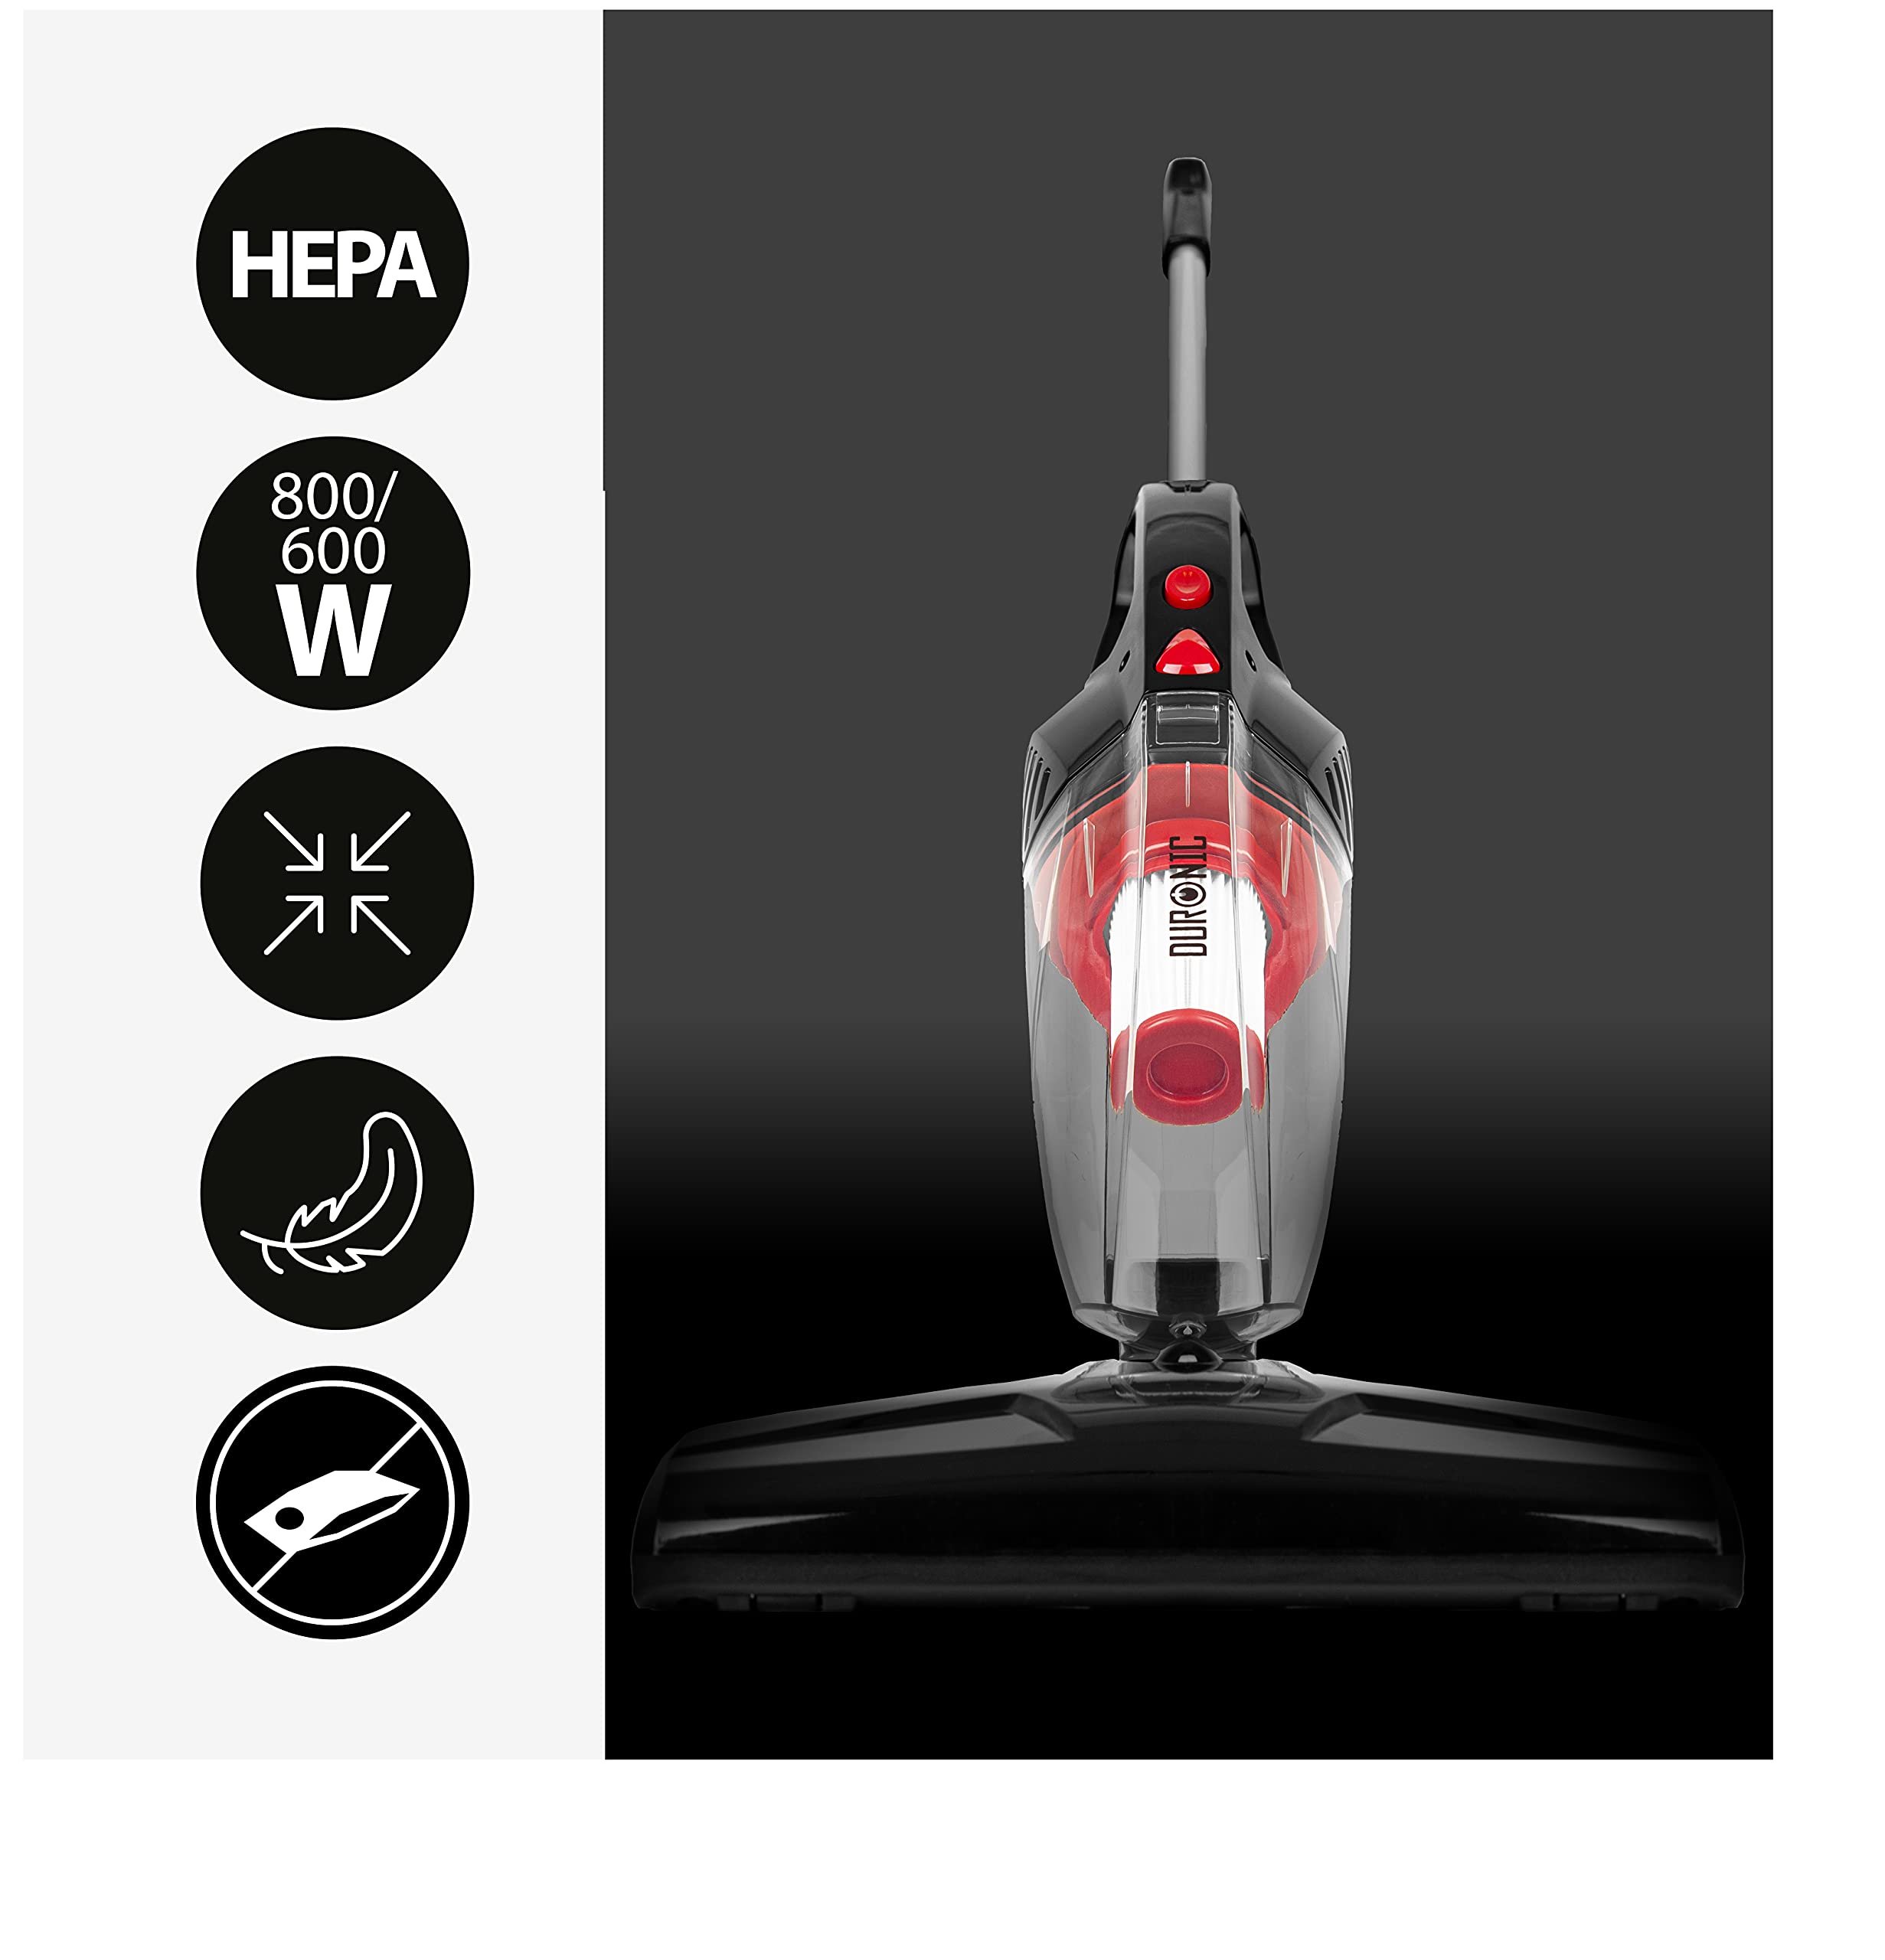 Duronic Upright Vacuum Cleaner VC8 Lightweight Corded Stick Vac Cleaners Hand Held Floor Carpet Upholstery Cleaner with HEPA Filter for Cleaning Dust, Hair in Home & Car